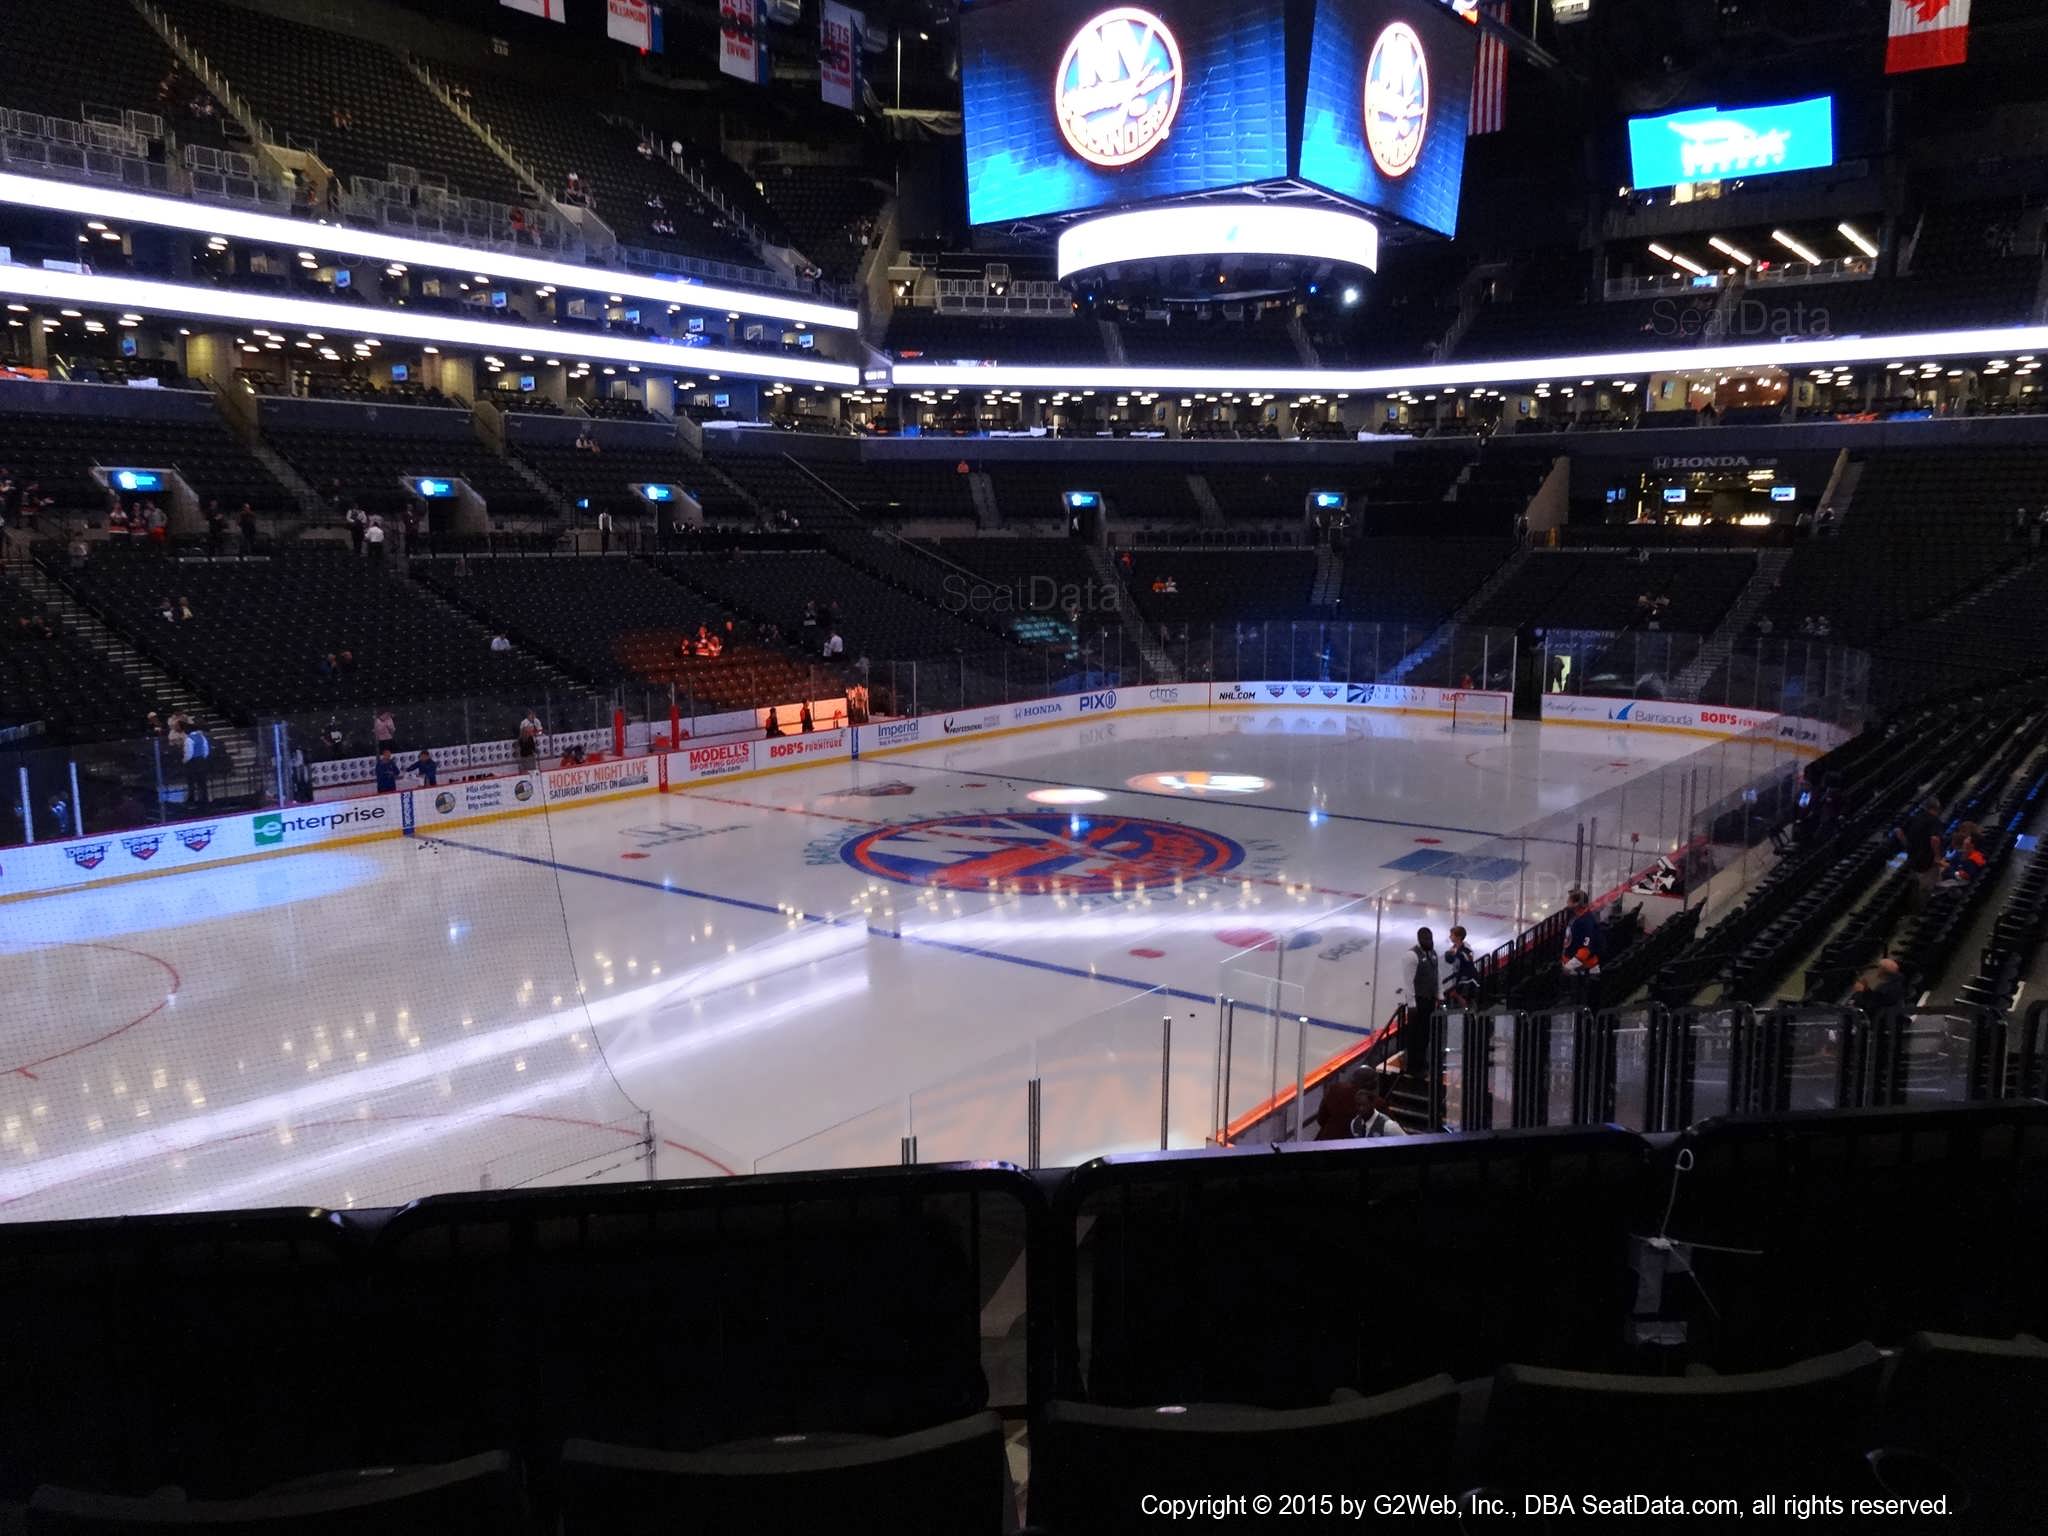 Seat View from Section 29 at the Barclays Center, home of the New York Islanders